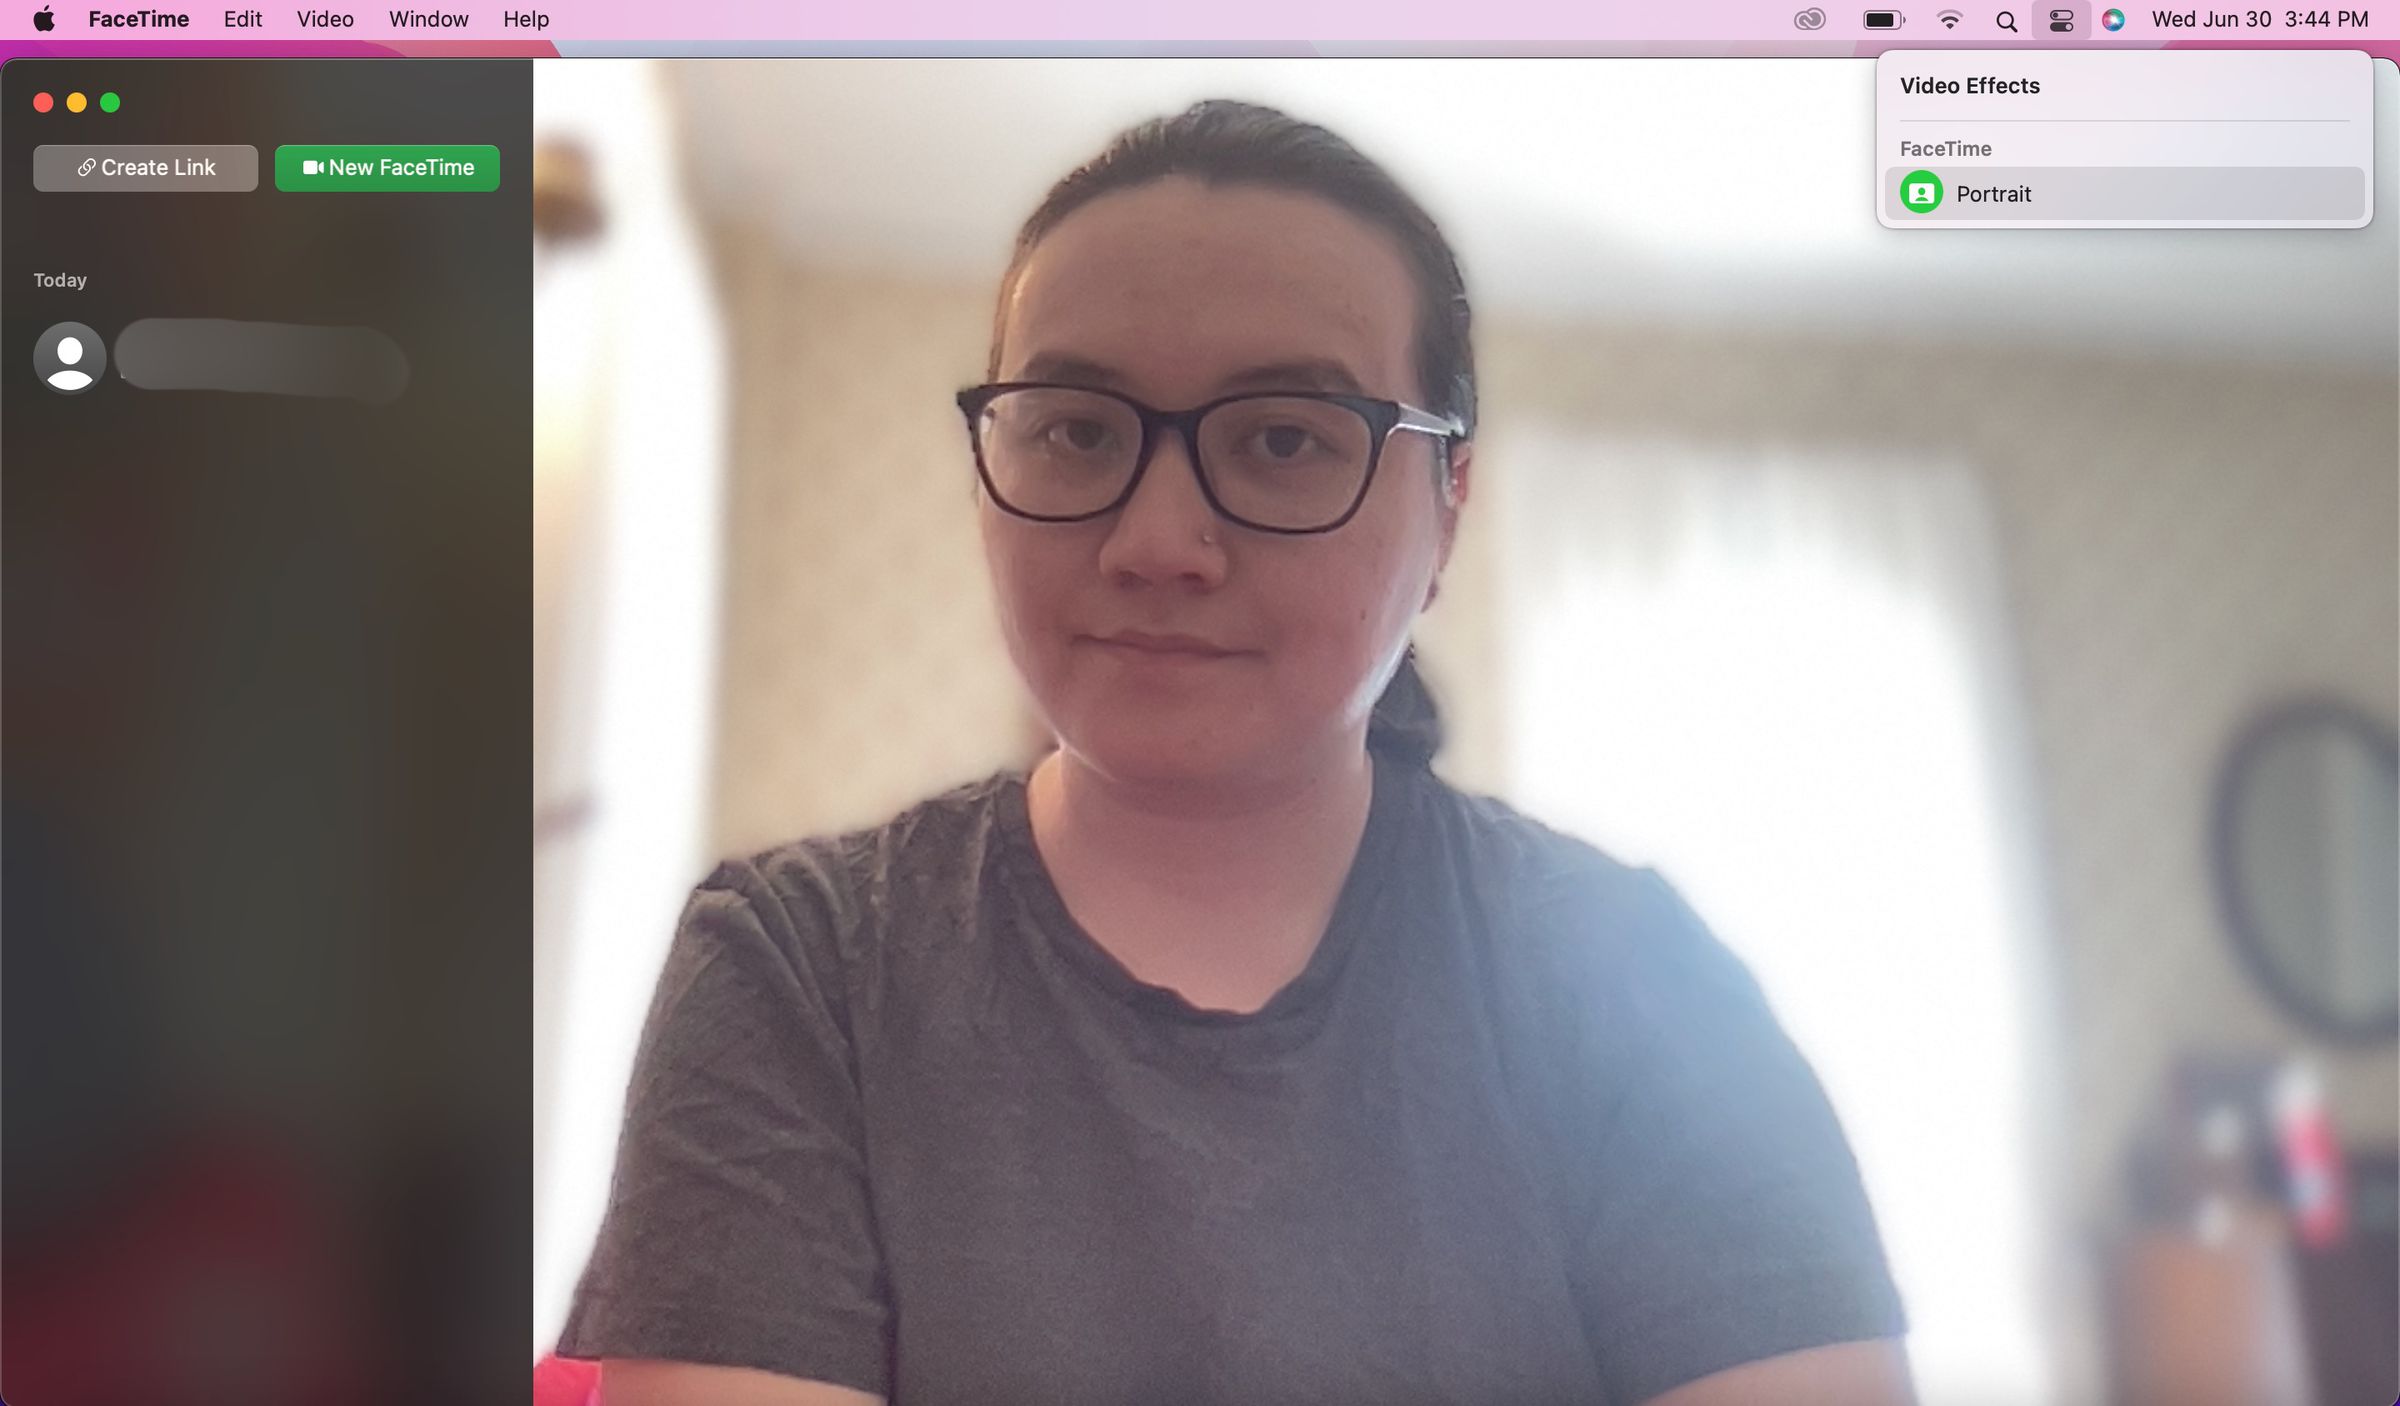 A screenshot of a MacBook screen where a user is on a FaceTime call with a blurred bright bedroom background. A FaceTime drop-down menu is open in the top right with Portrait selected.